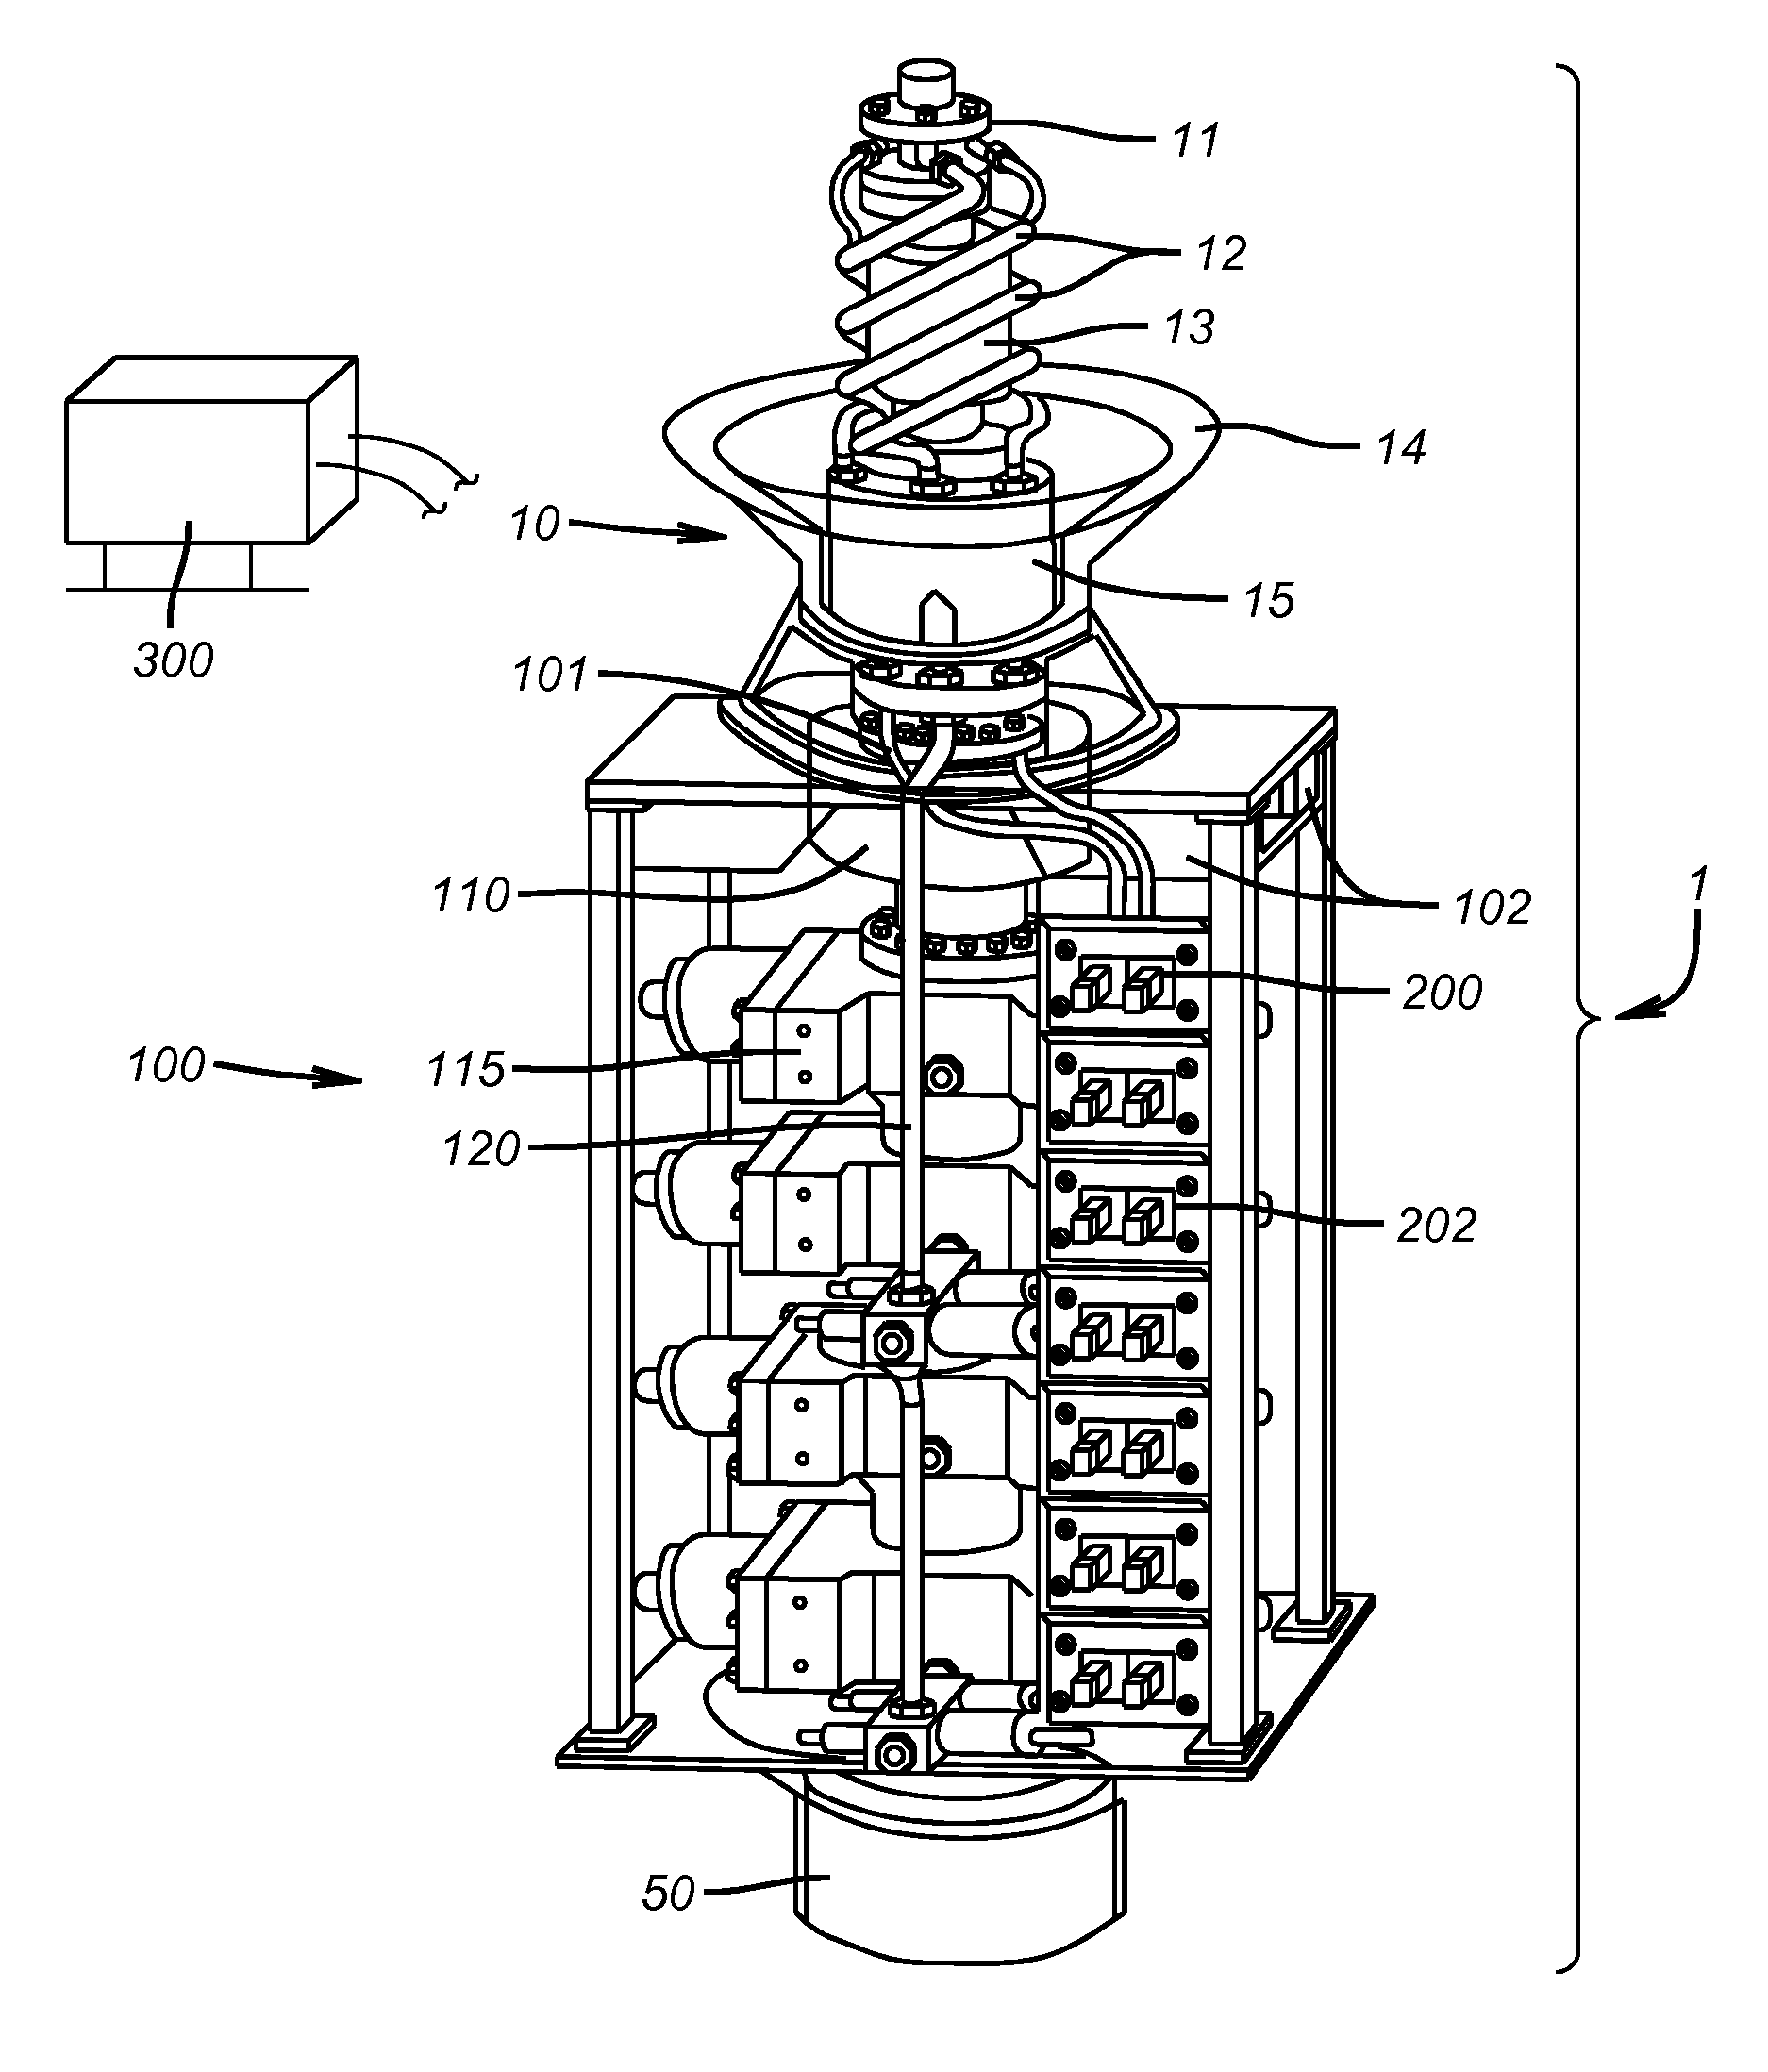 Modular, distributed, ROV retrievable subsea control system, associated deepwater subsea blowout preventer stack configuration, and methods of use